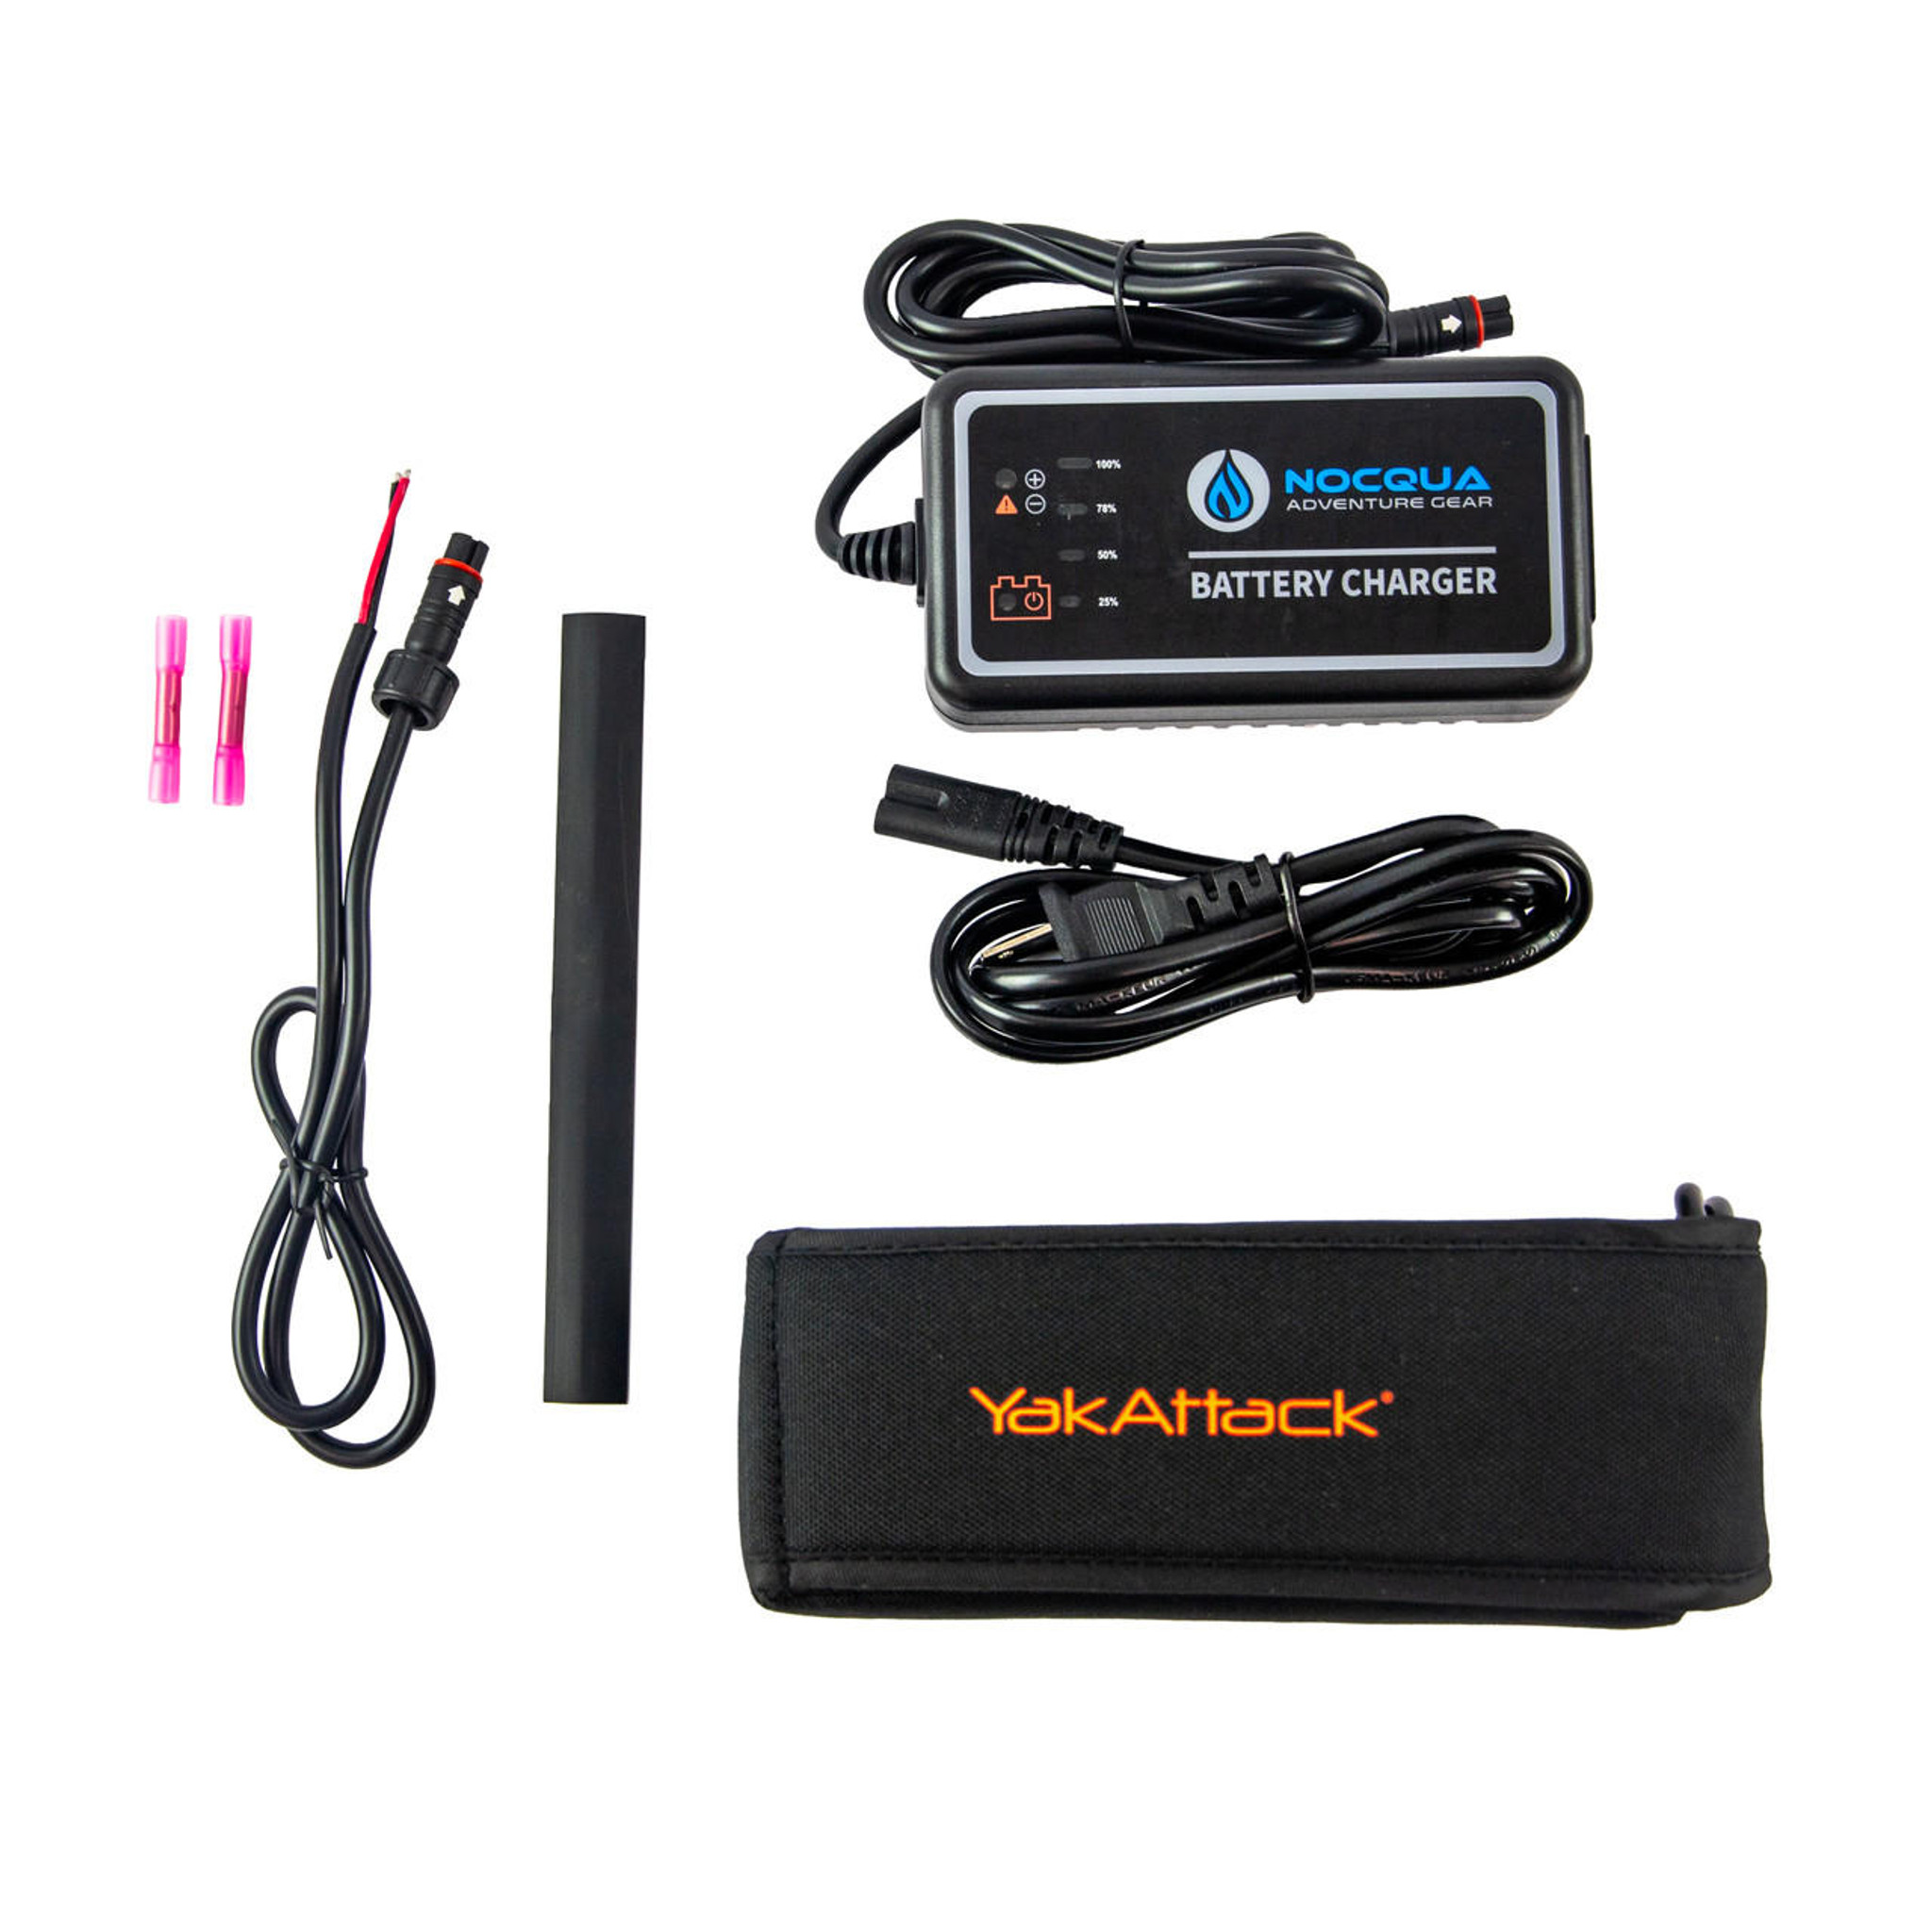 YakAttack 20Ah Pro Power Fish Finder Lithium Battery Kit - Powered by  Nocqua Adventure Gear